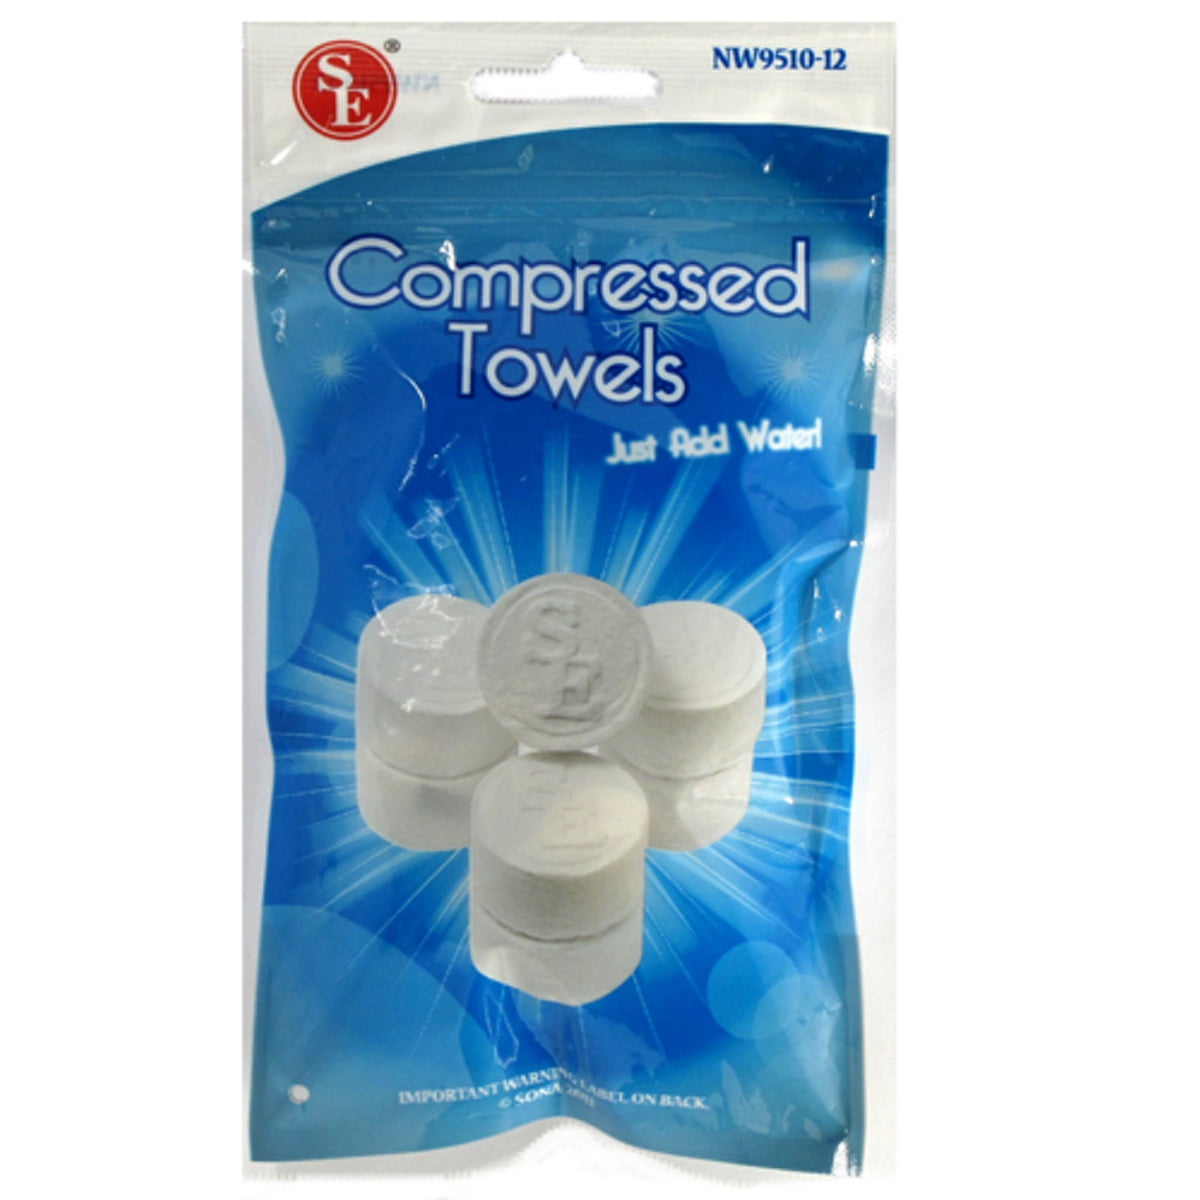 100 Compressed Towels Tablet Capsules Wash Cloths Camping Survival Emergency BOB 